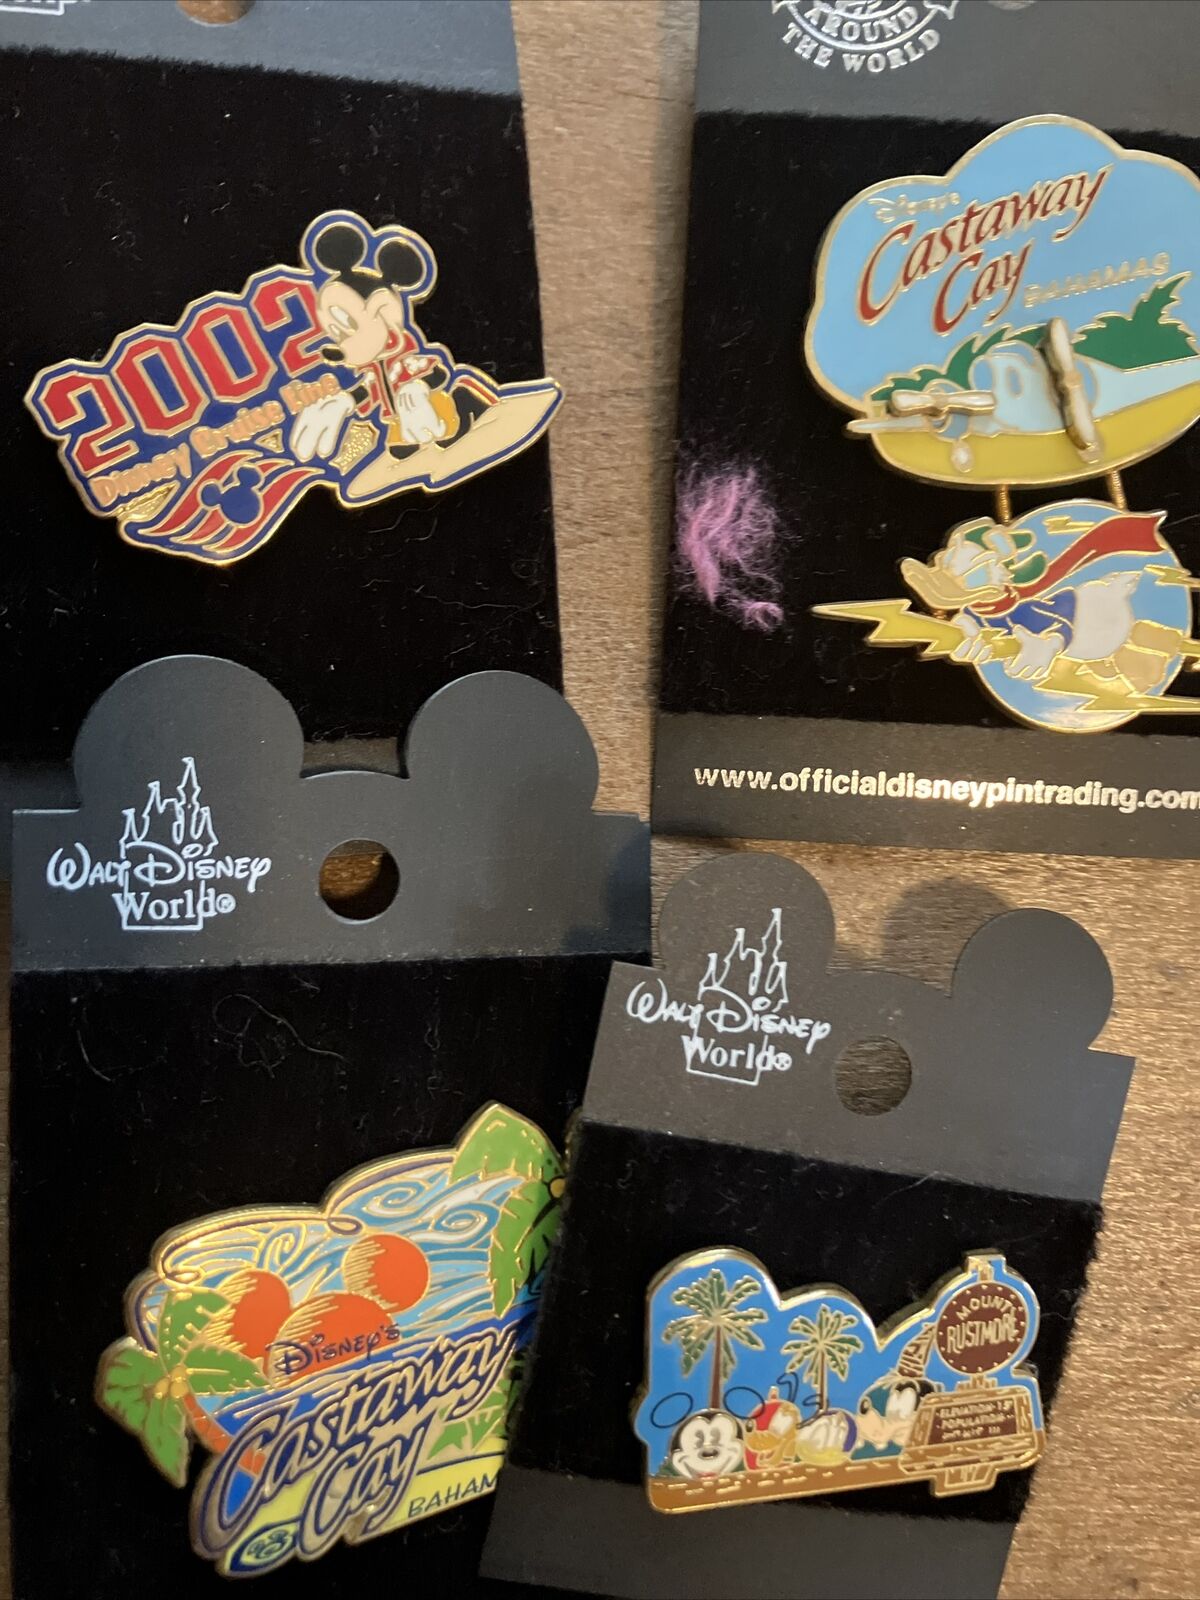 Lot of 4 Vintage Disney Trade Pins Castaway Cay Donald Mickey New on Cards